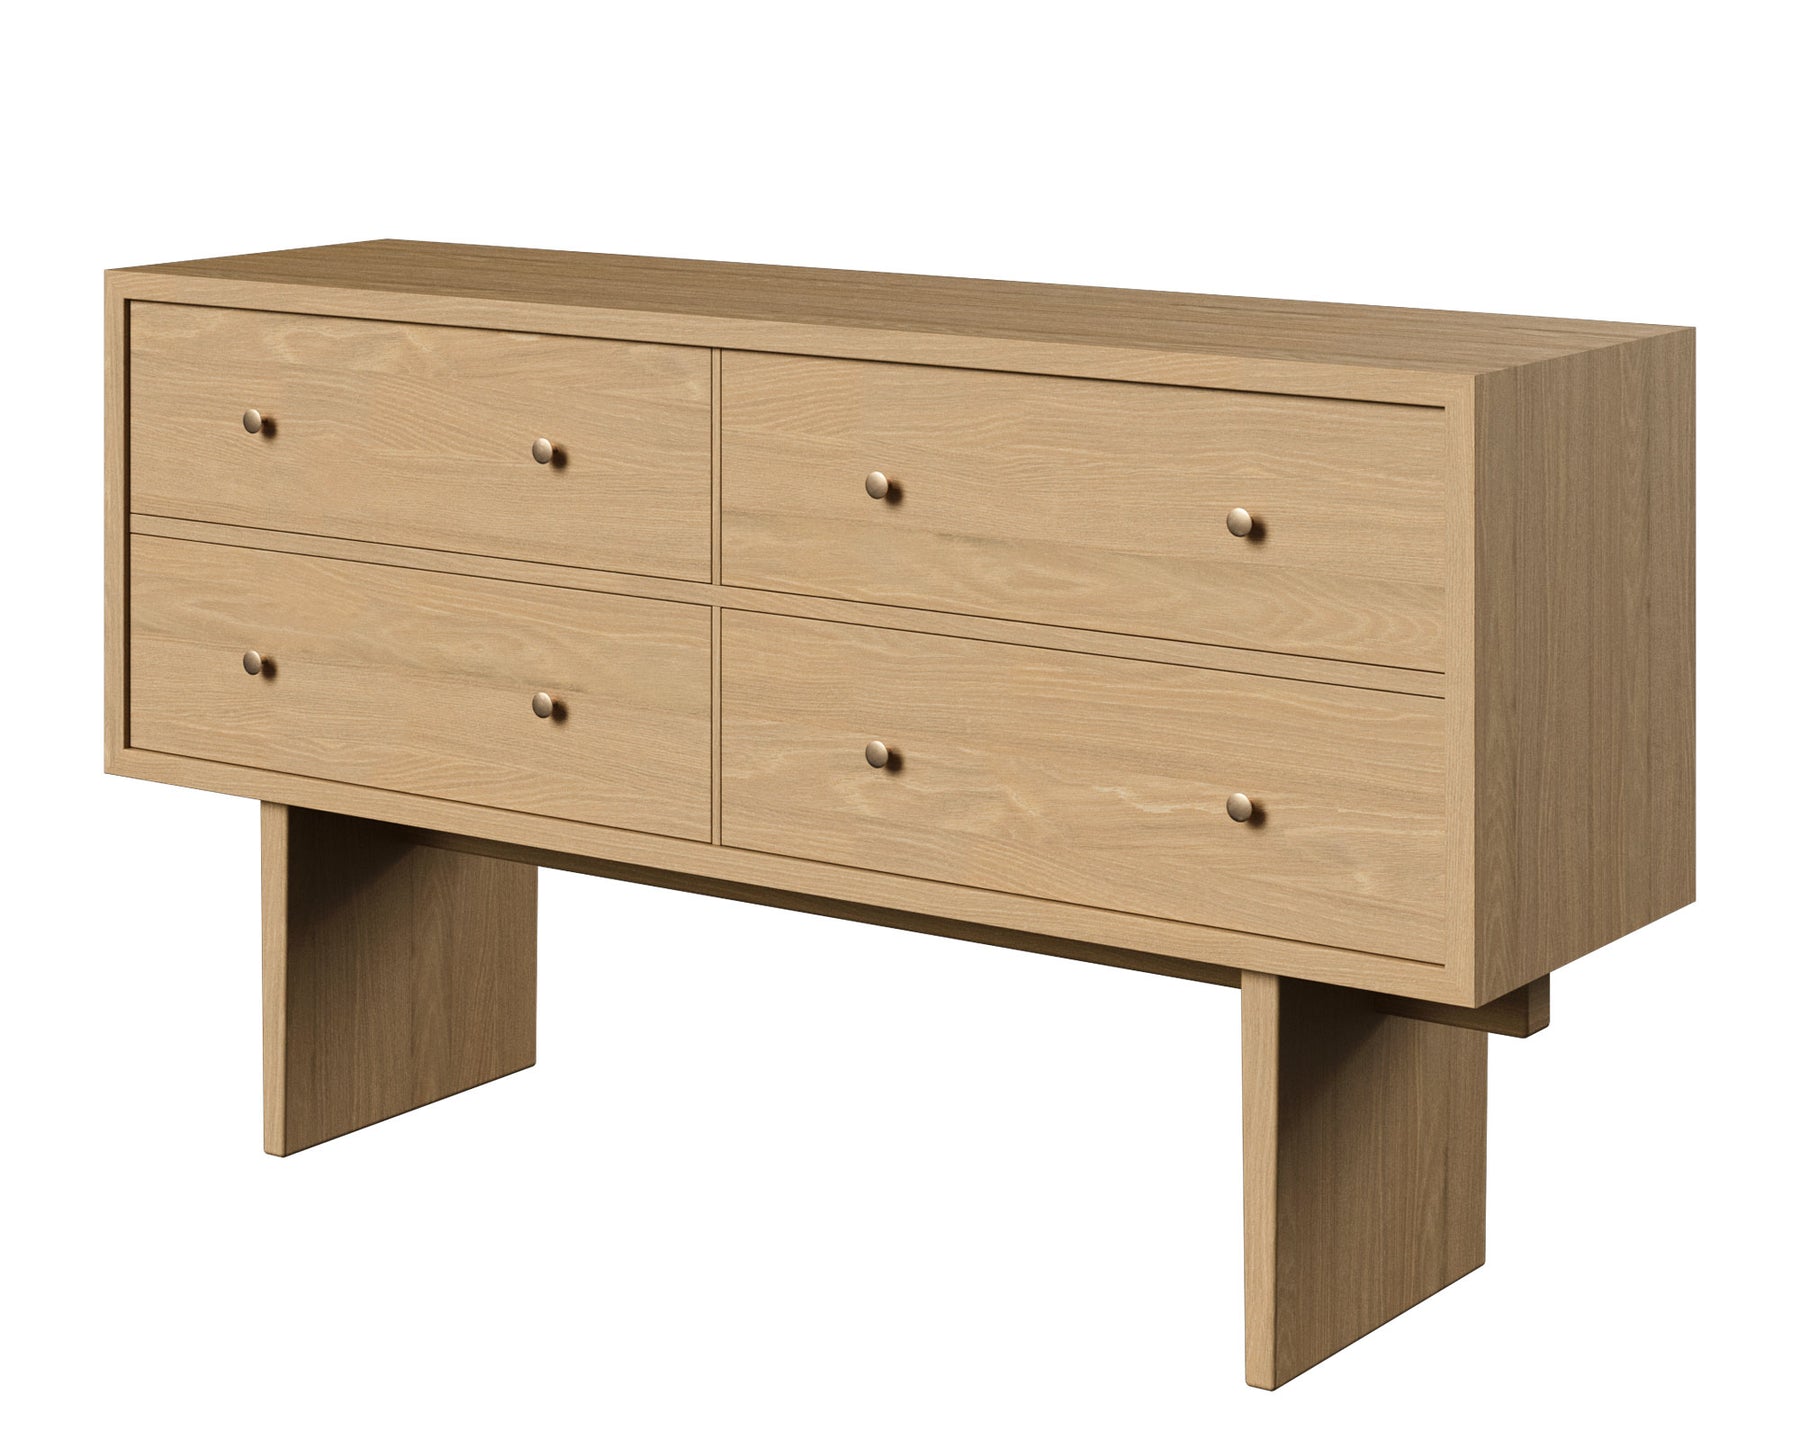 Private Sideboard | DSHOP